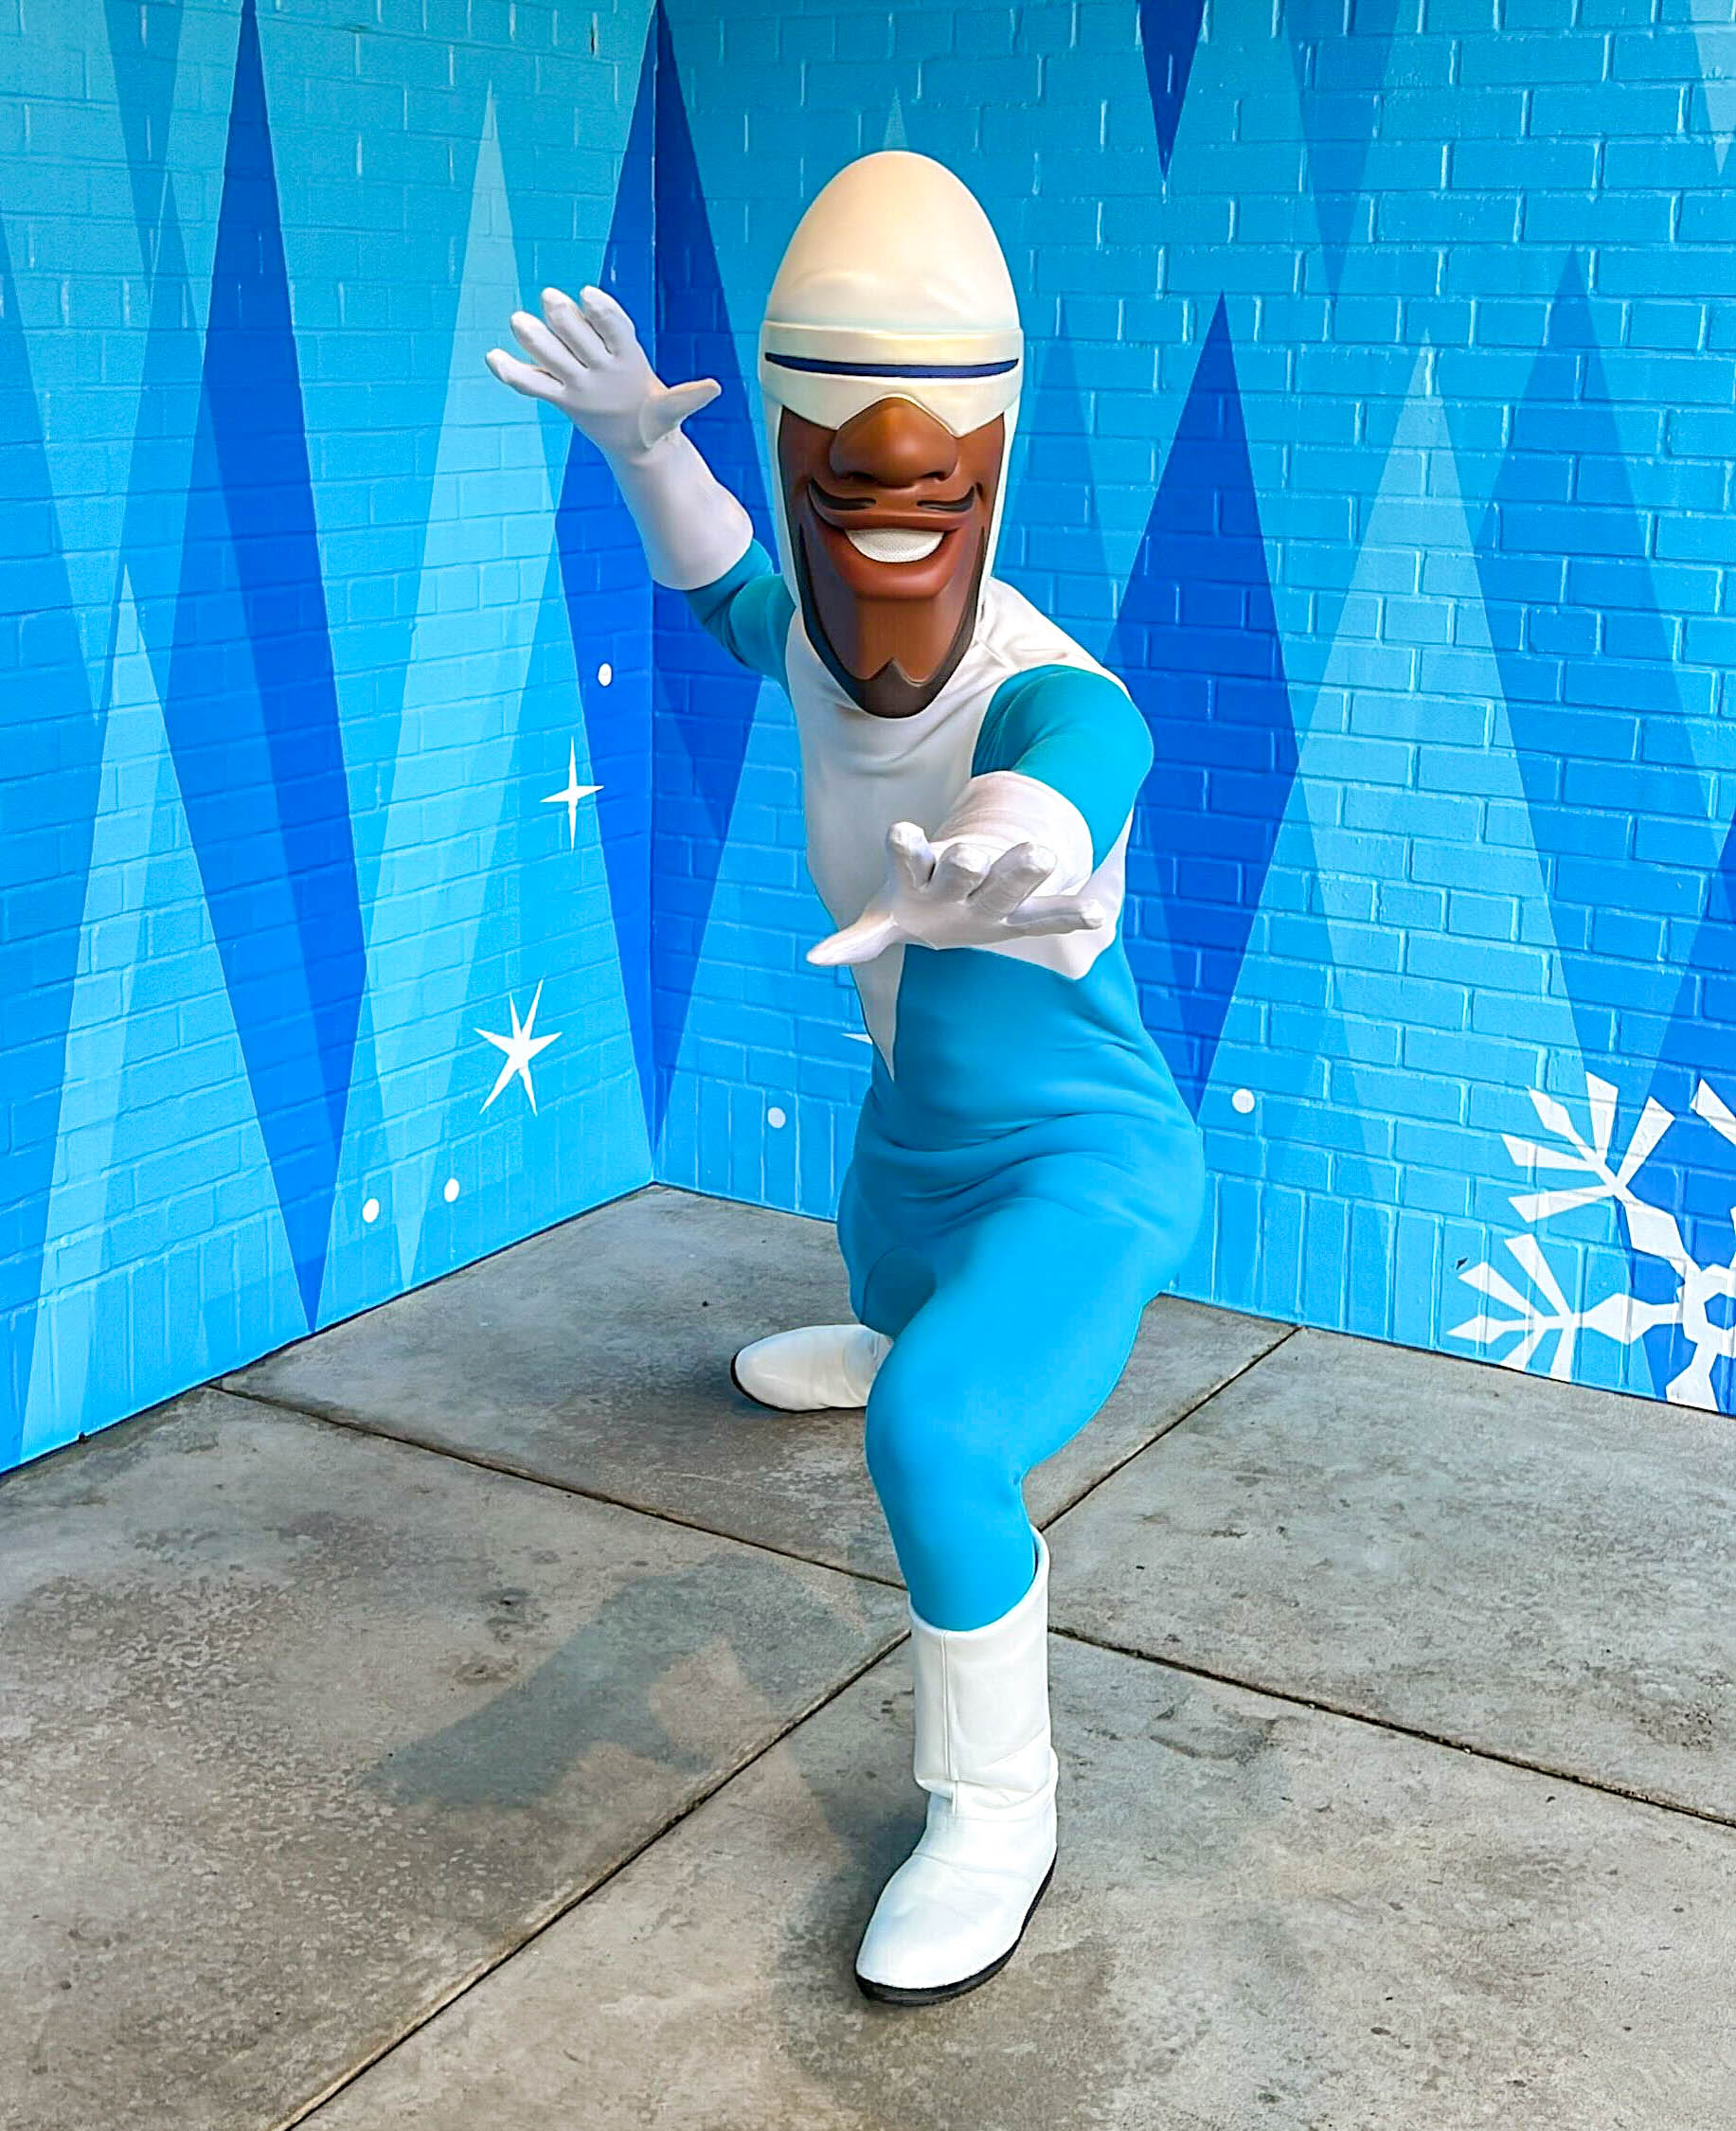 Frozone Meet and Greet